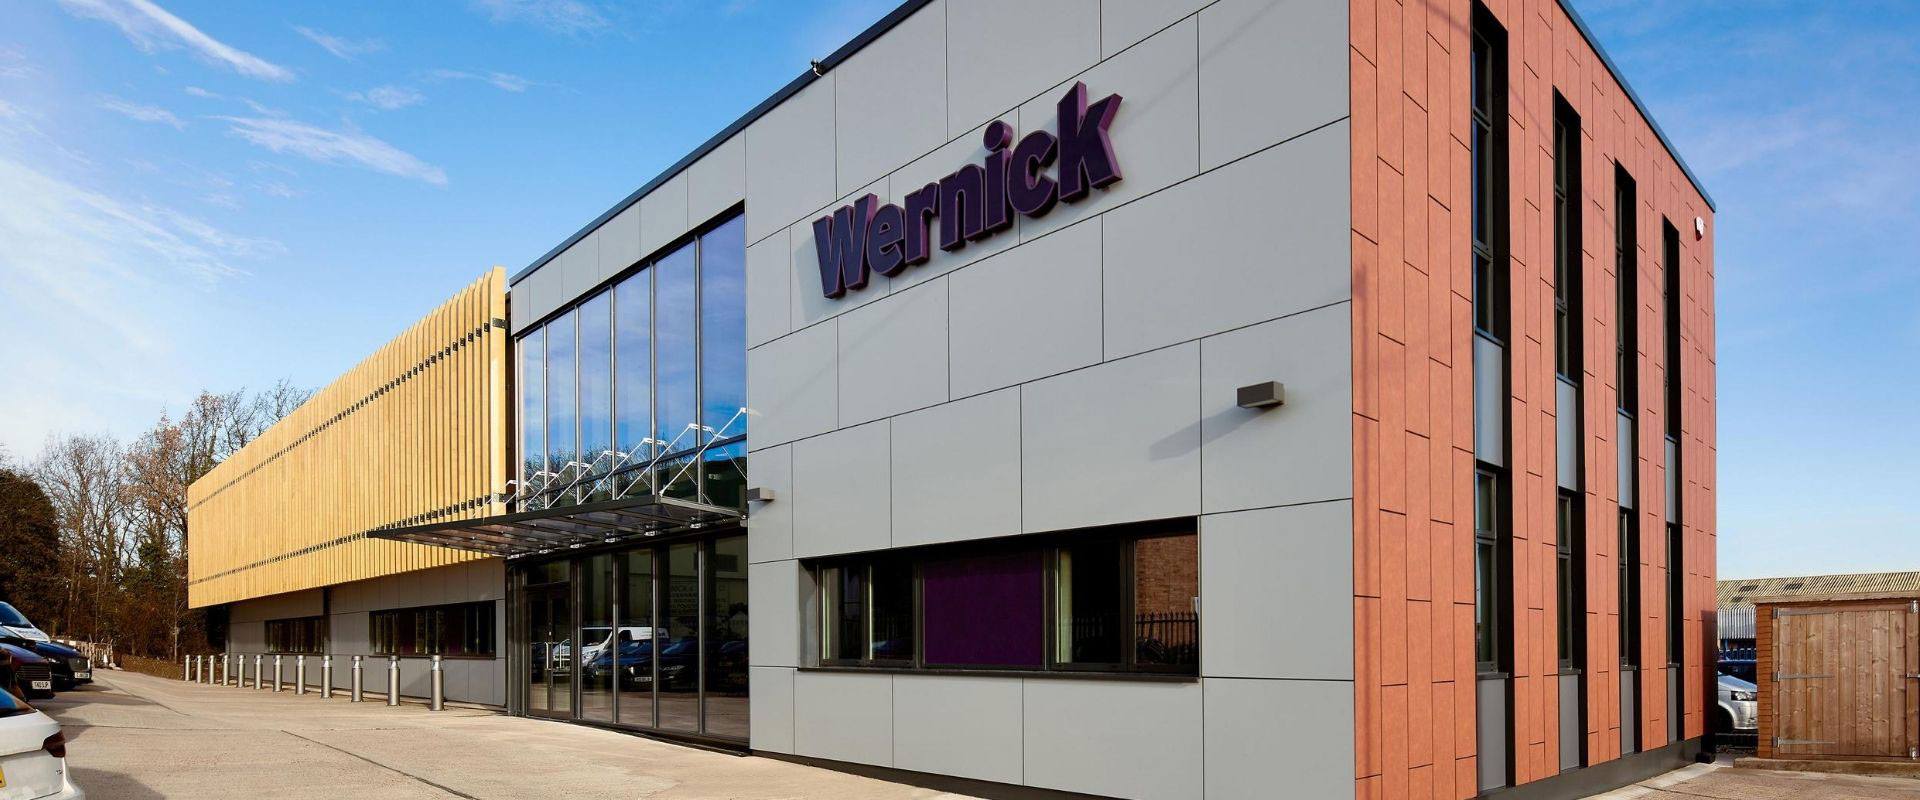 Wernick Group Head Office Exterior